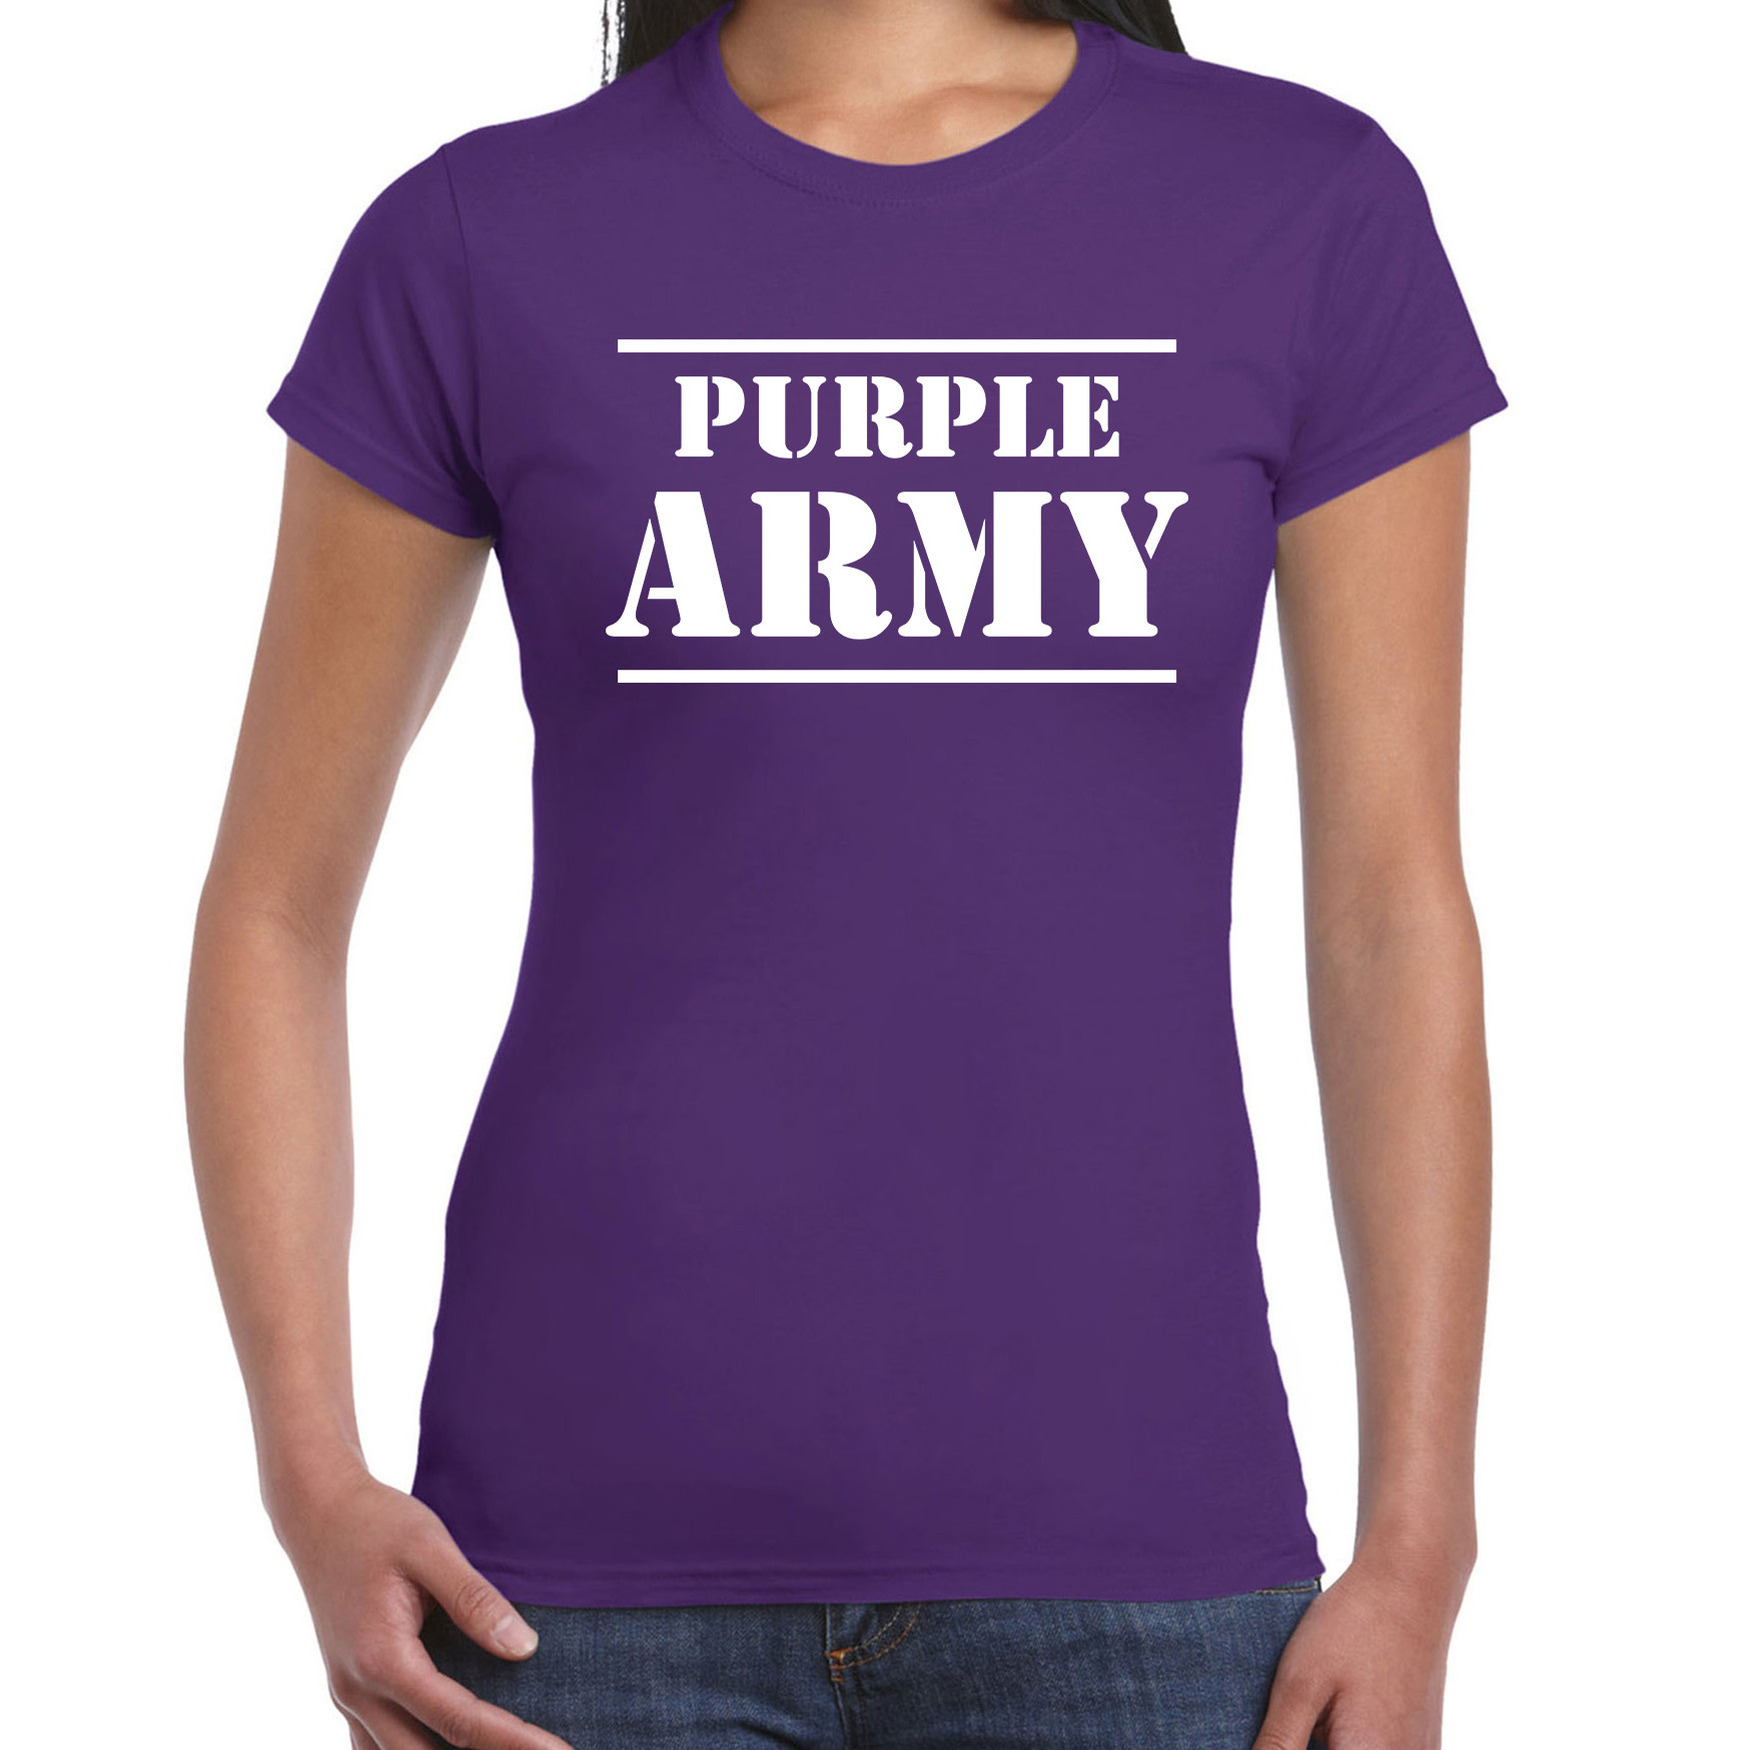 Purple army-Paarse leger supporter-fan t-shirt paars voor dames Toppers-Paarse vrijdag